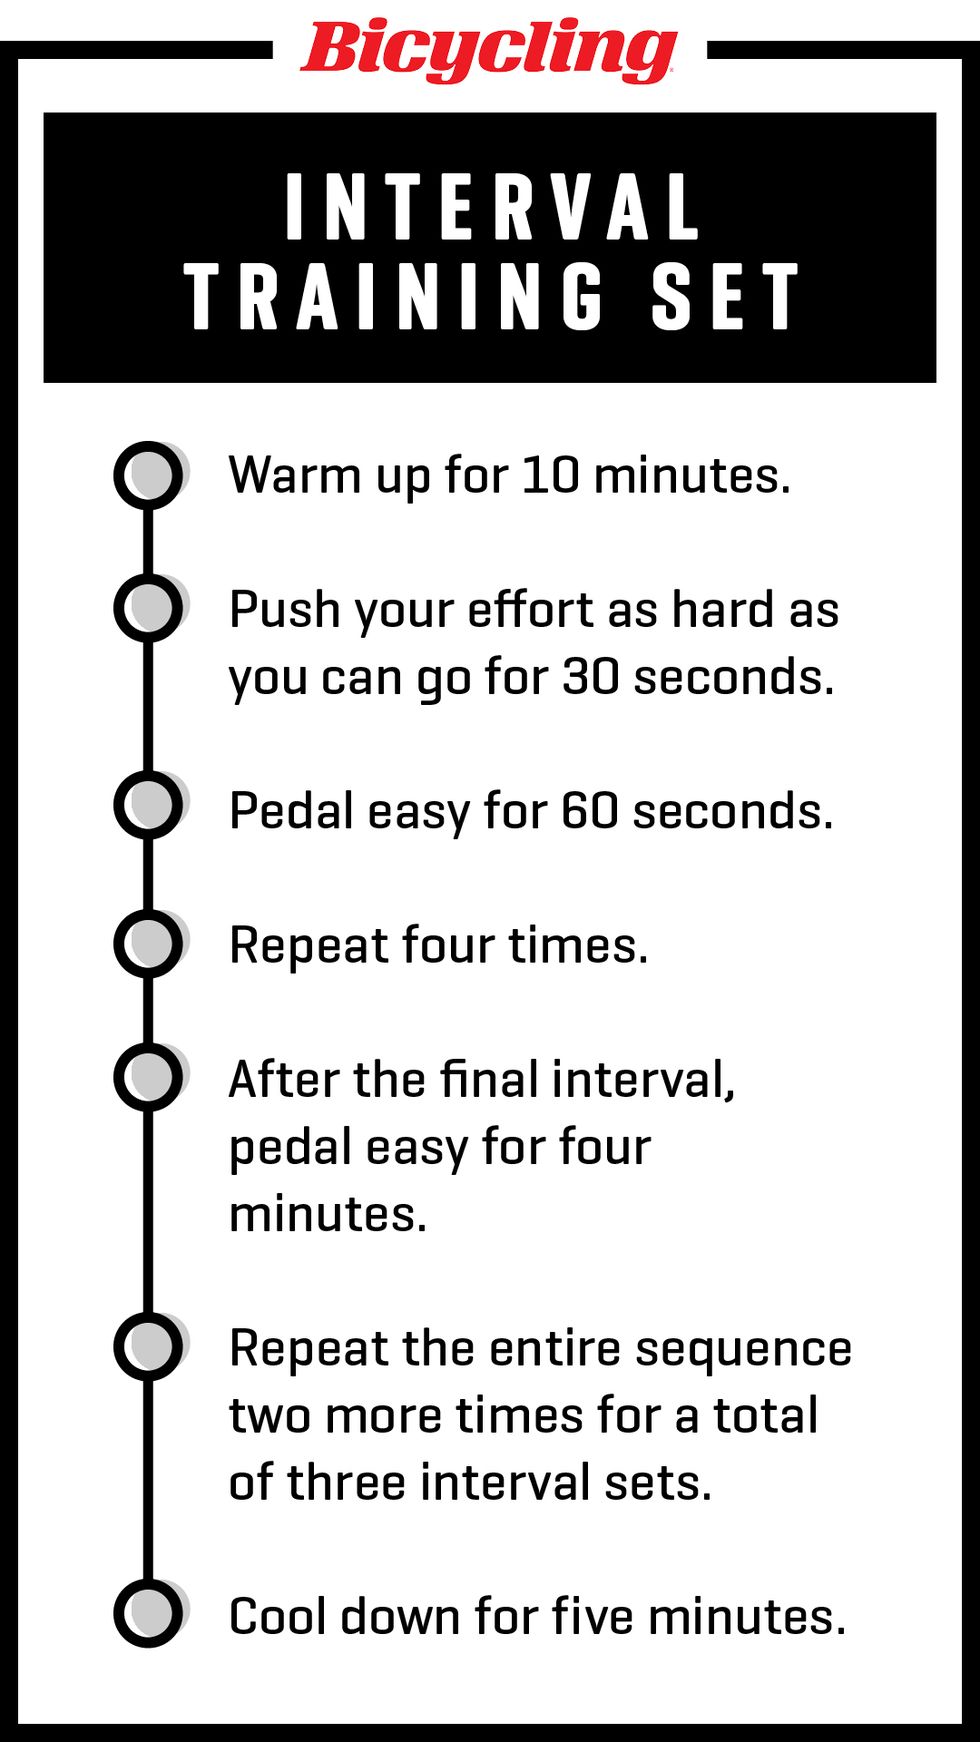 Hiit Cycling All About High Intensity